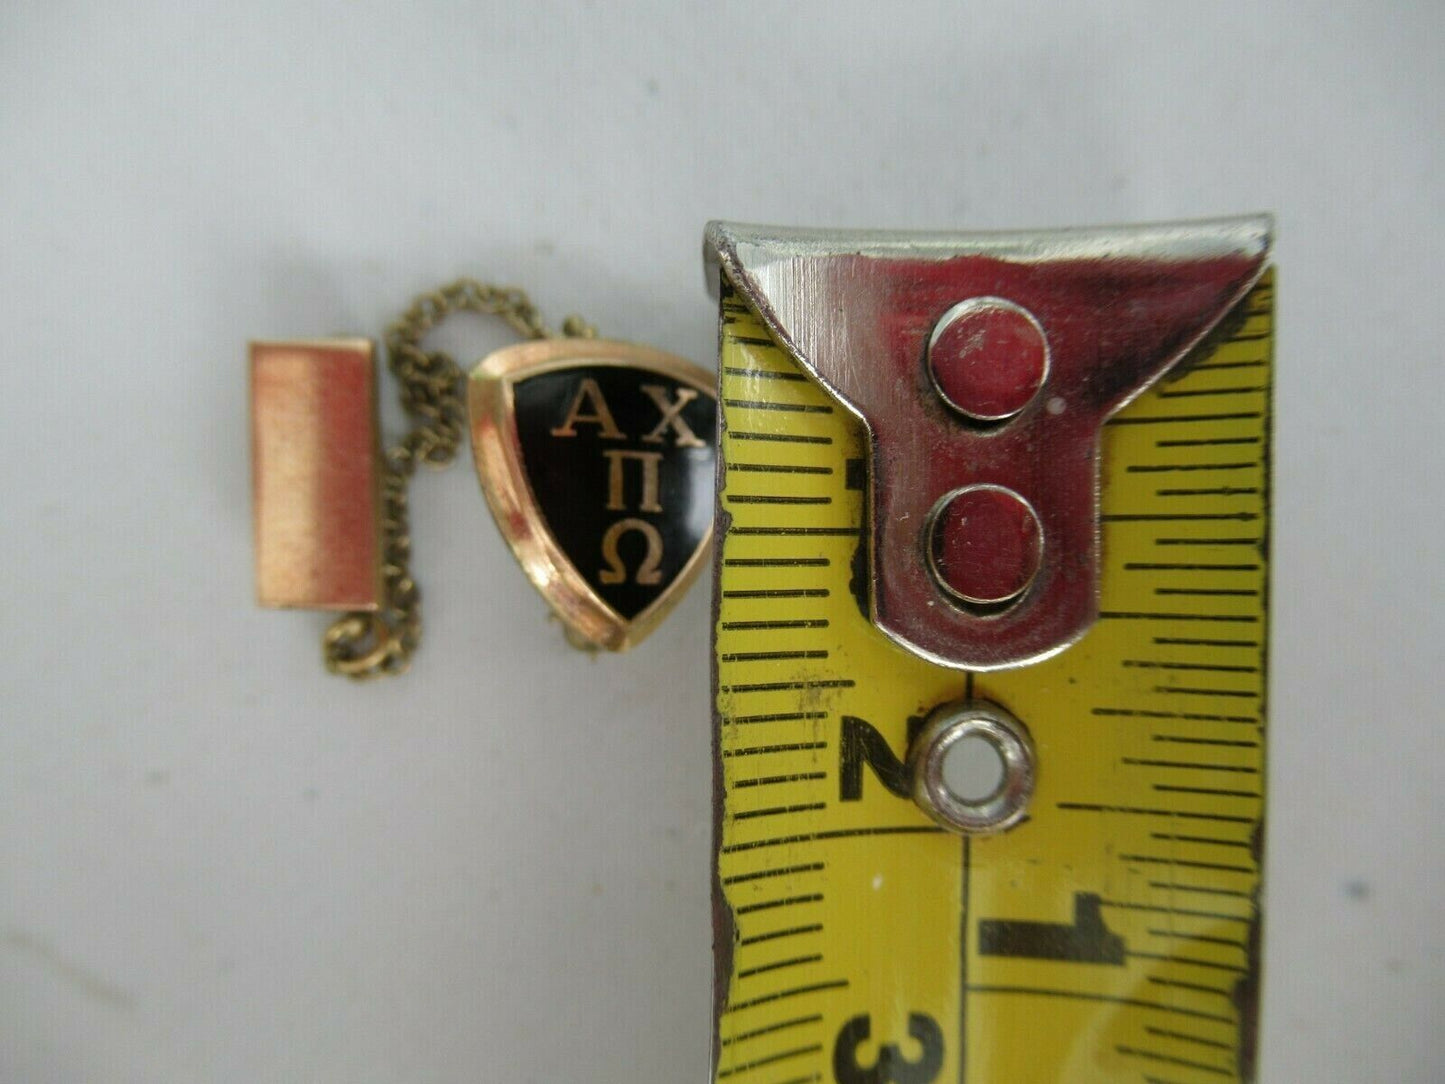 USA FRATERNITY PIN ALPHA CHI PI OMEGA. MADE IN GOLD 10K. MARKED. 1752